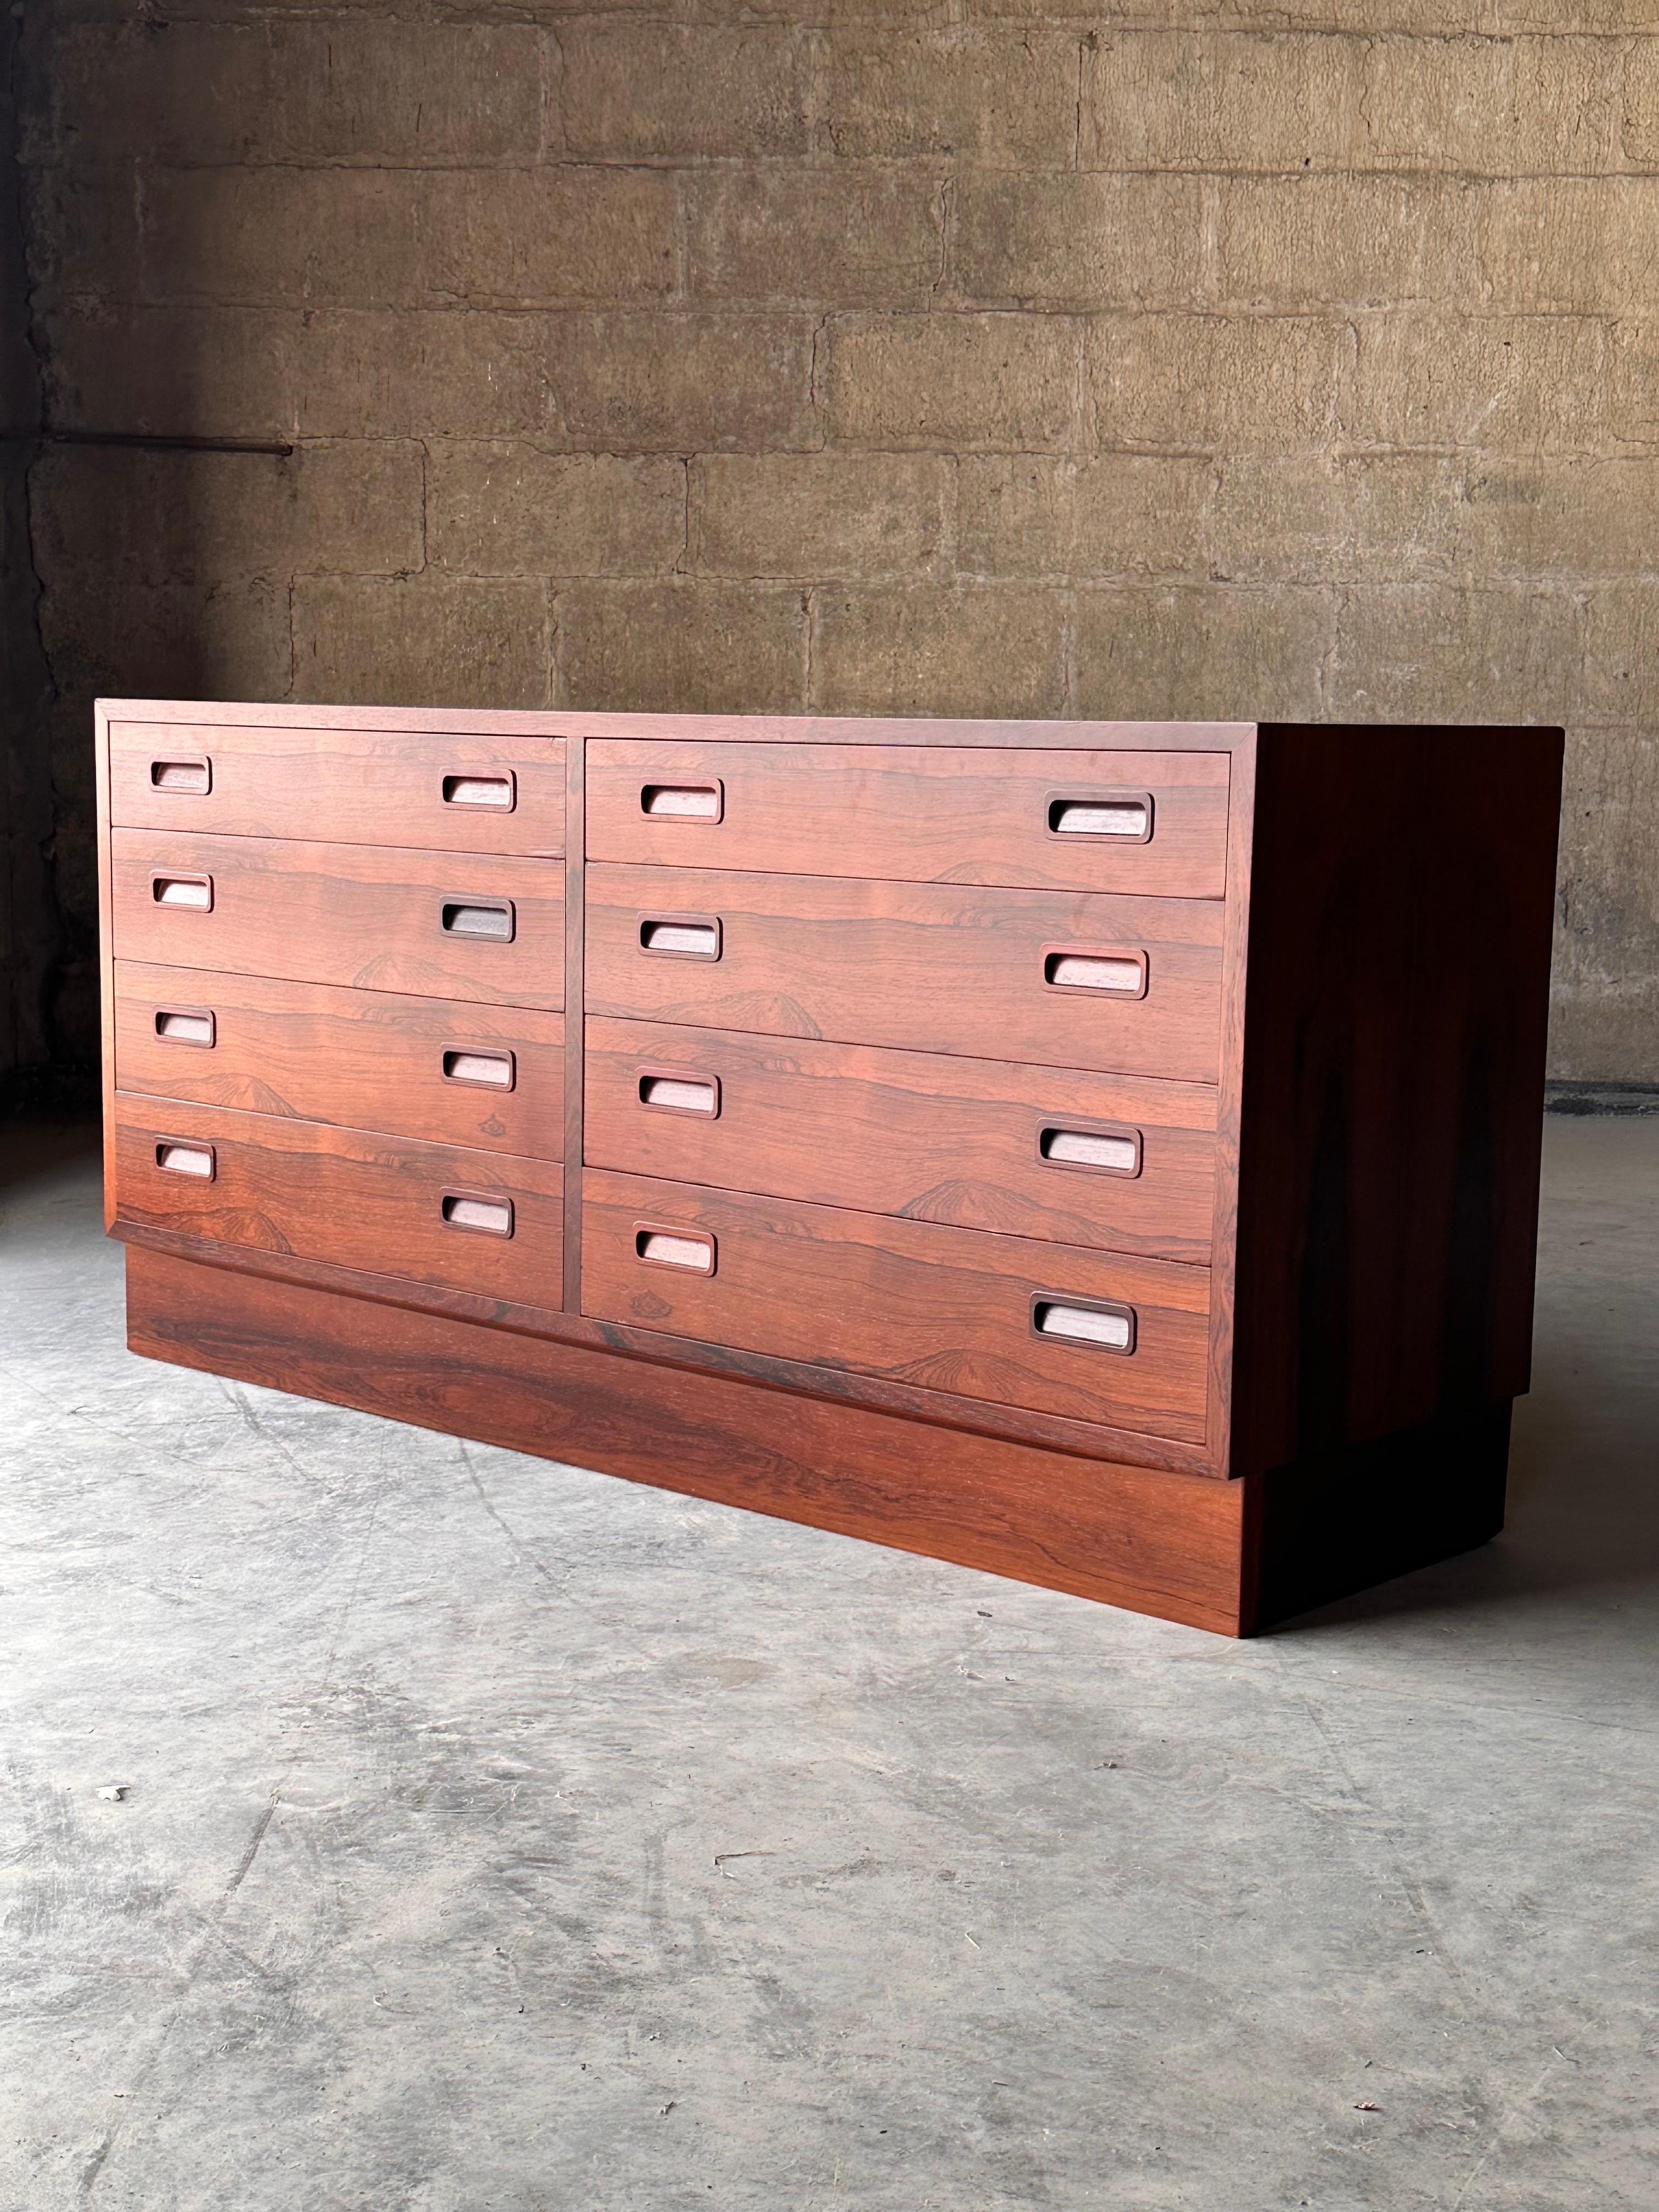 A stunning mid century dresser by Poul Hundevad in bookmatched rosewood. Dovetailed drawers open with recessed handles.